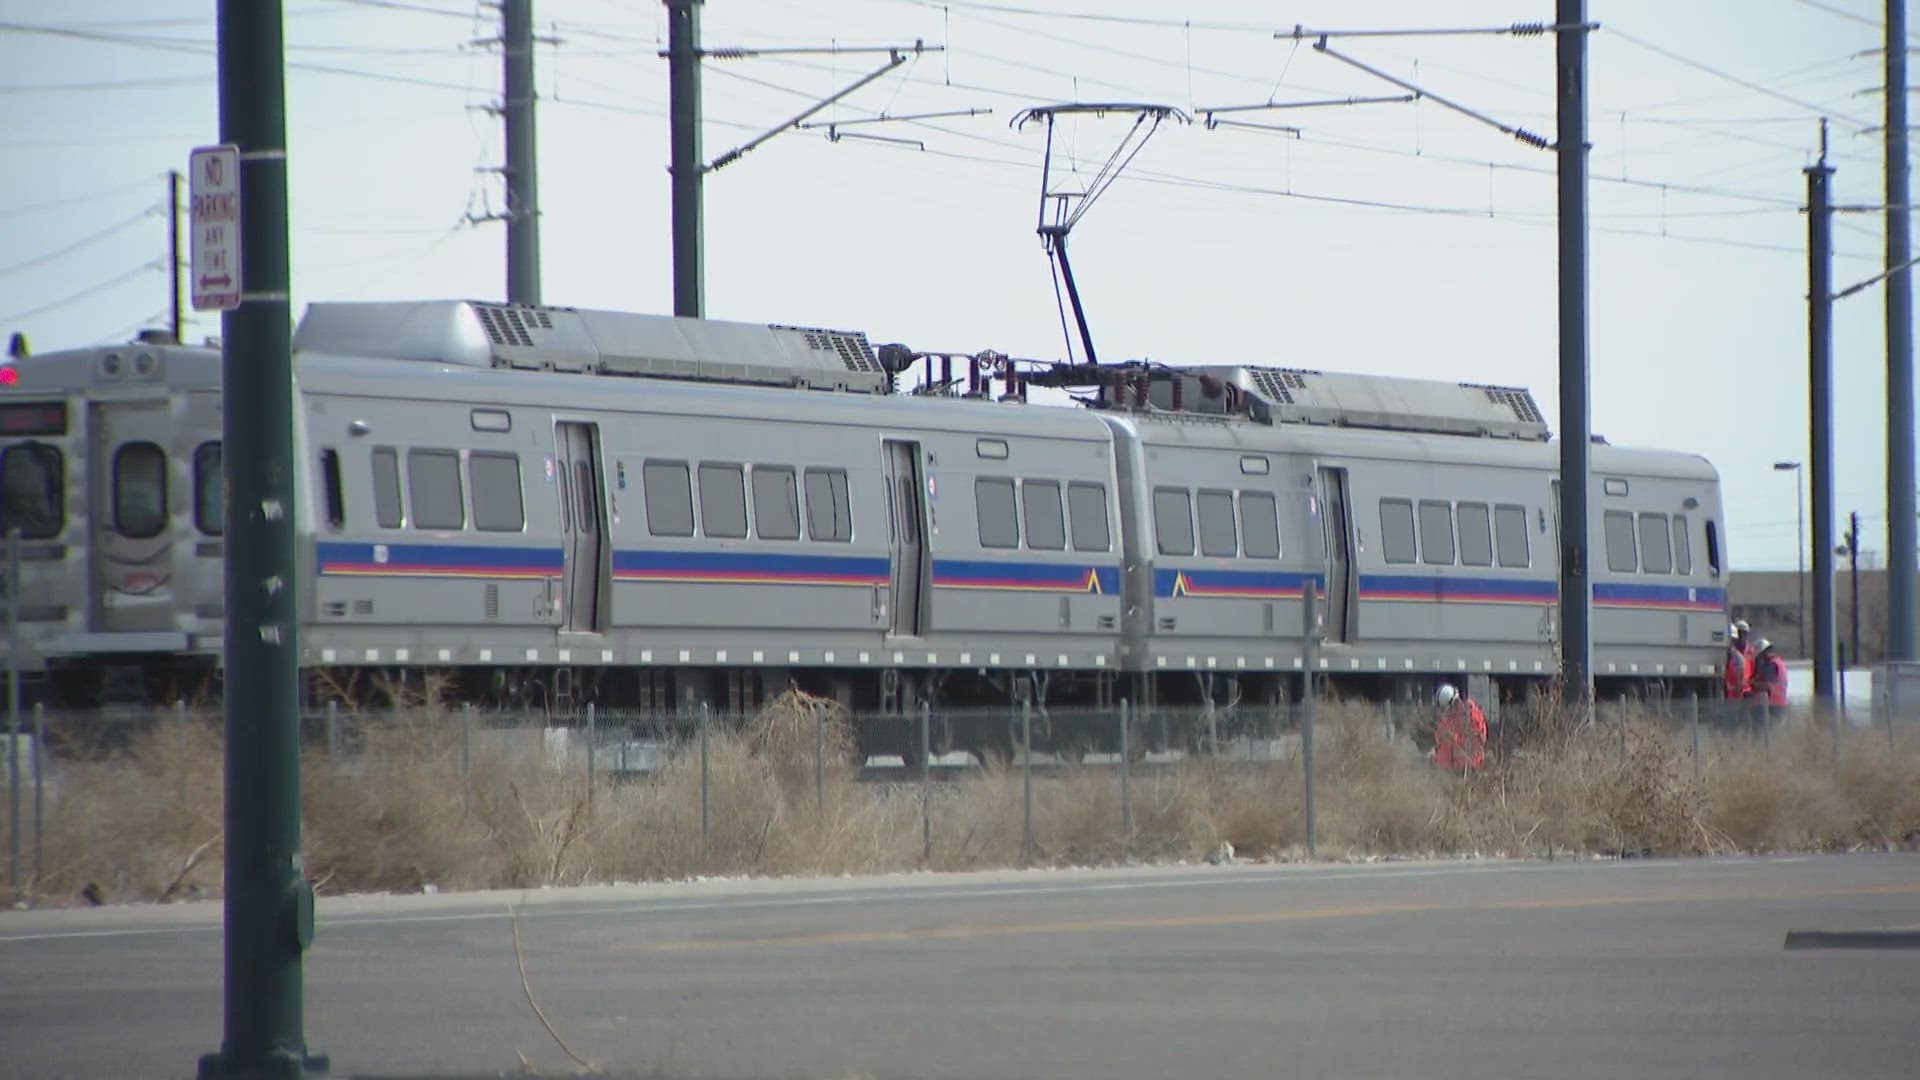 A pedestrian was hit and killed by an A Line train on Sunday around the intersection of Smith Road and Monaco Street Parkway, Denver Police said.